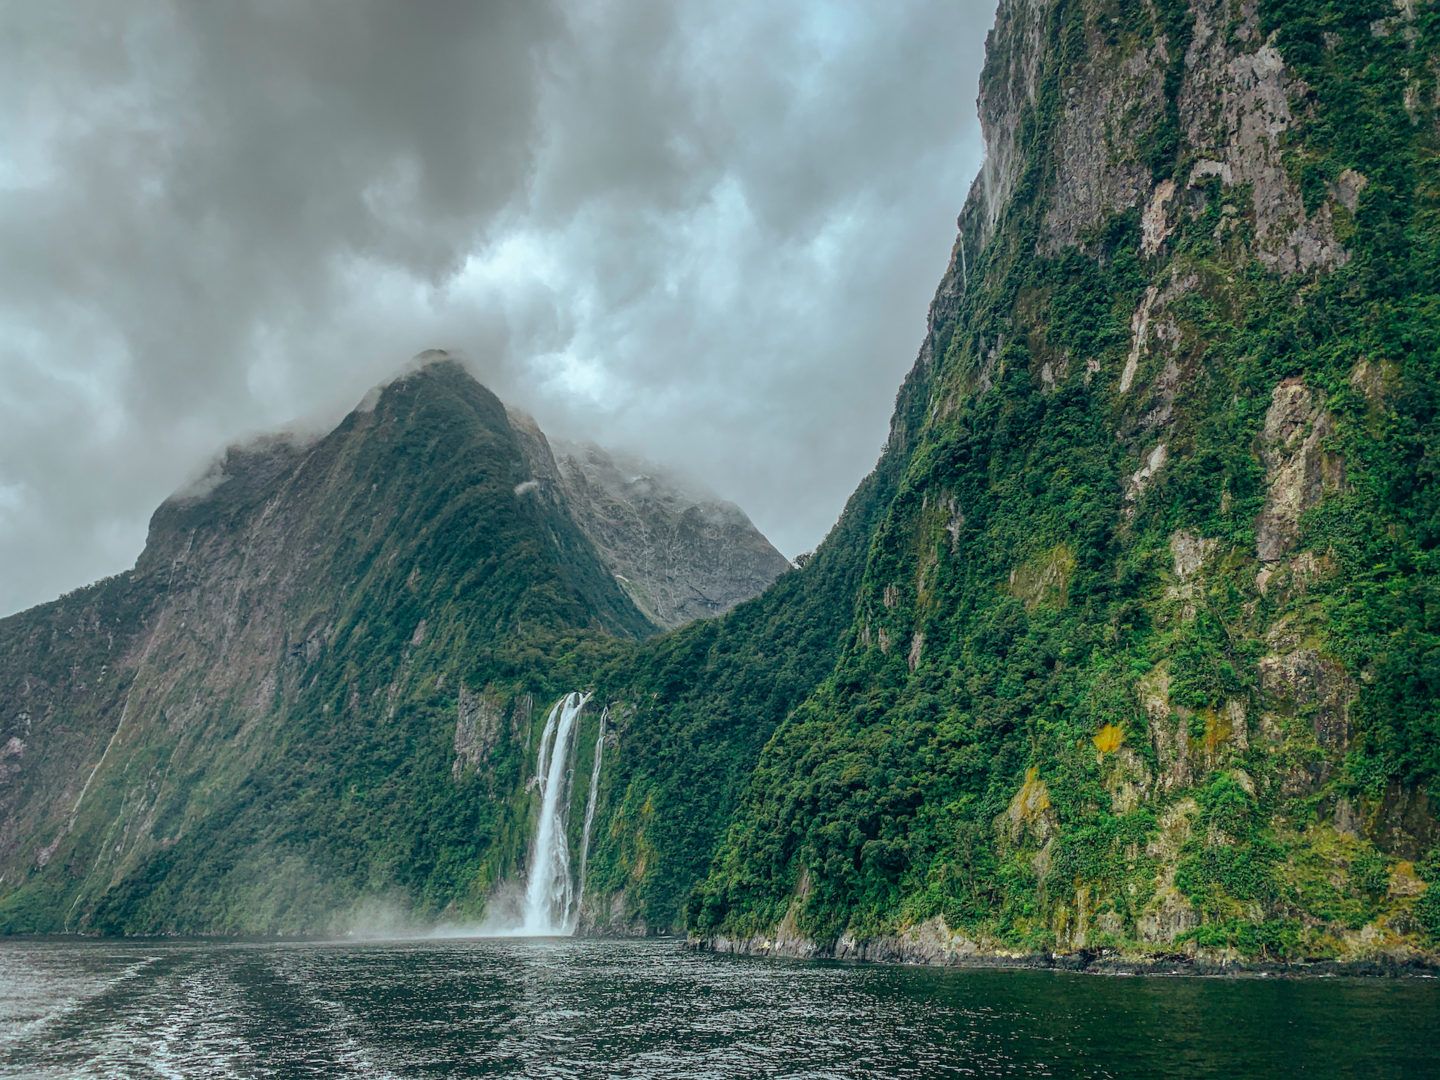 Waterfall at Milford Sound - New Zealand